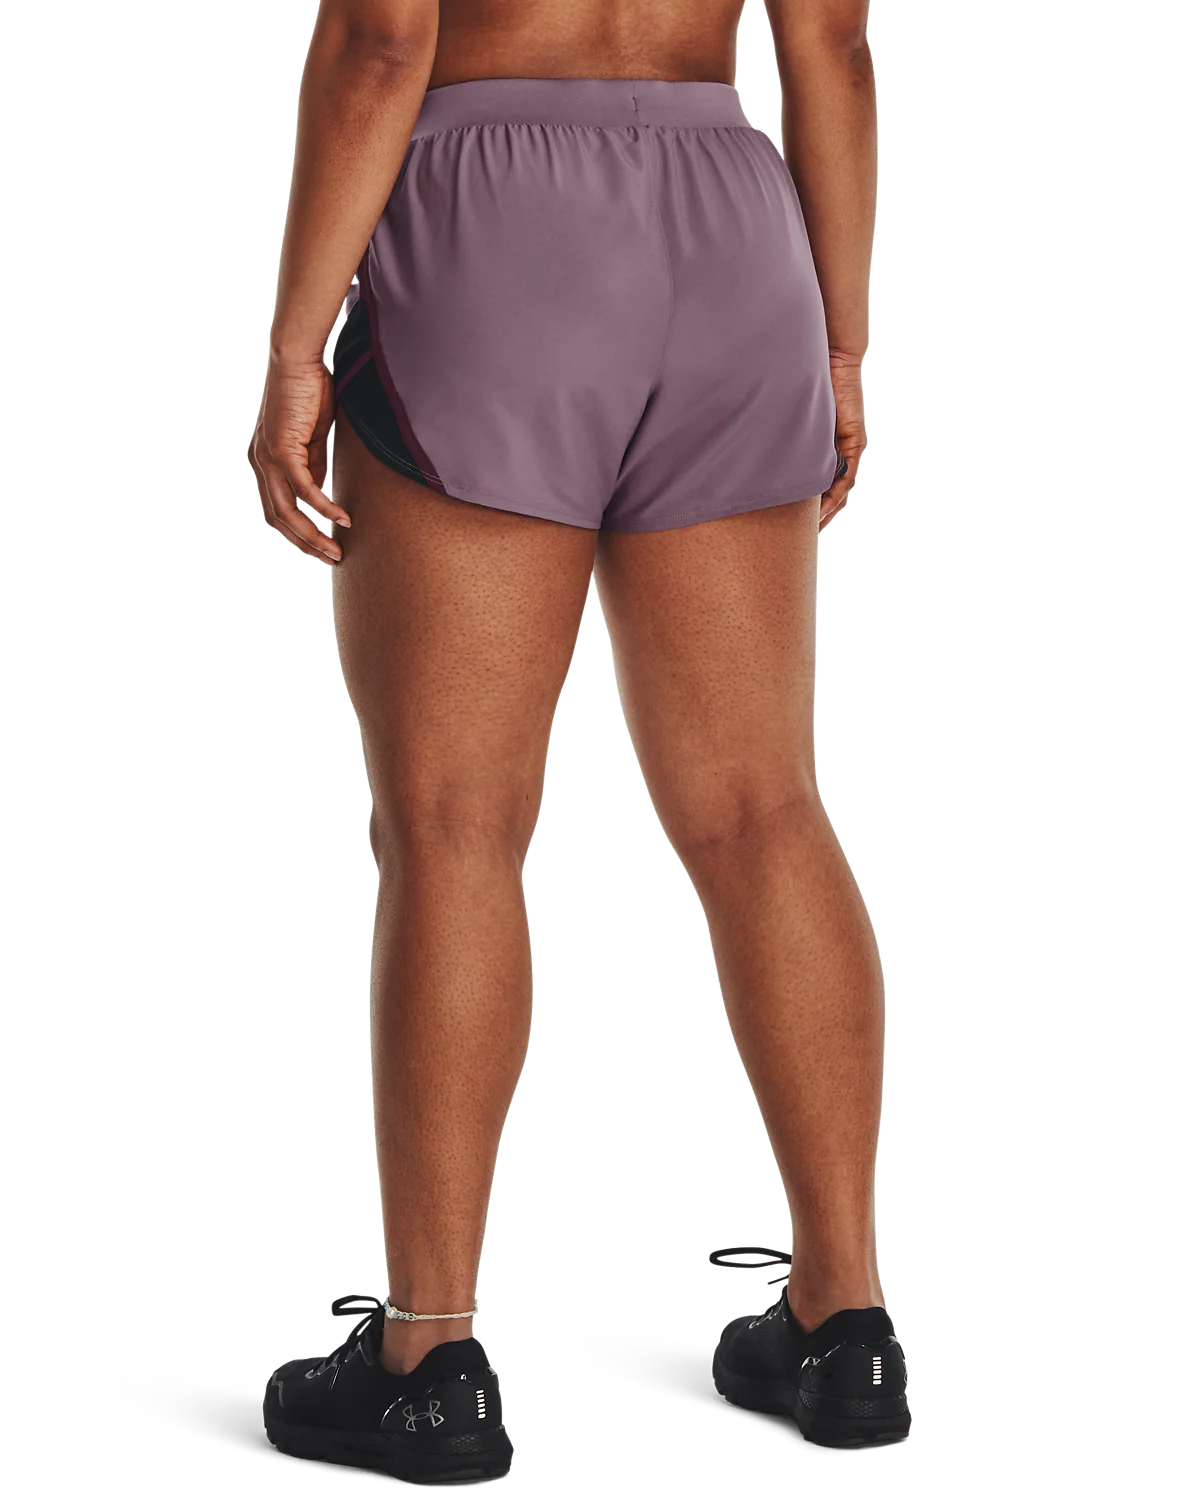 Under Armour Fly By 2.0 Shorts Plum